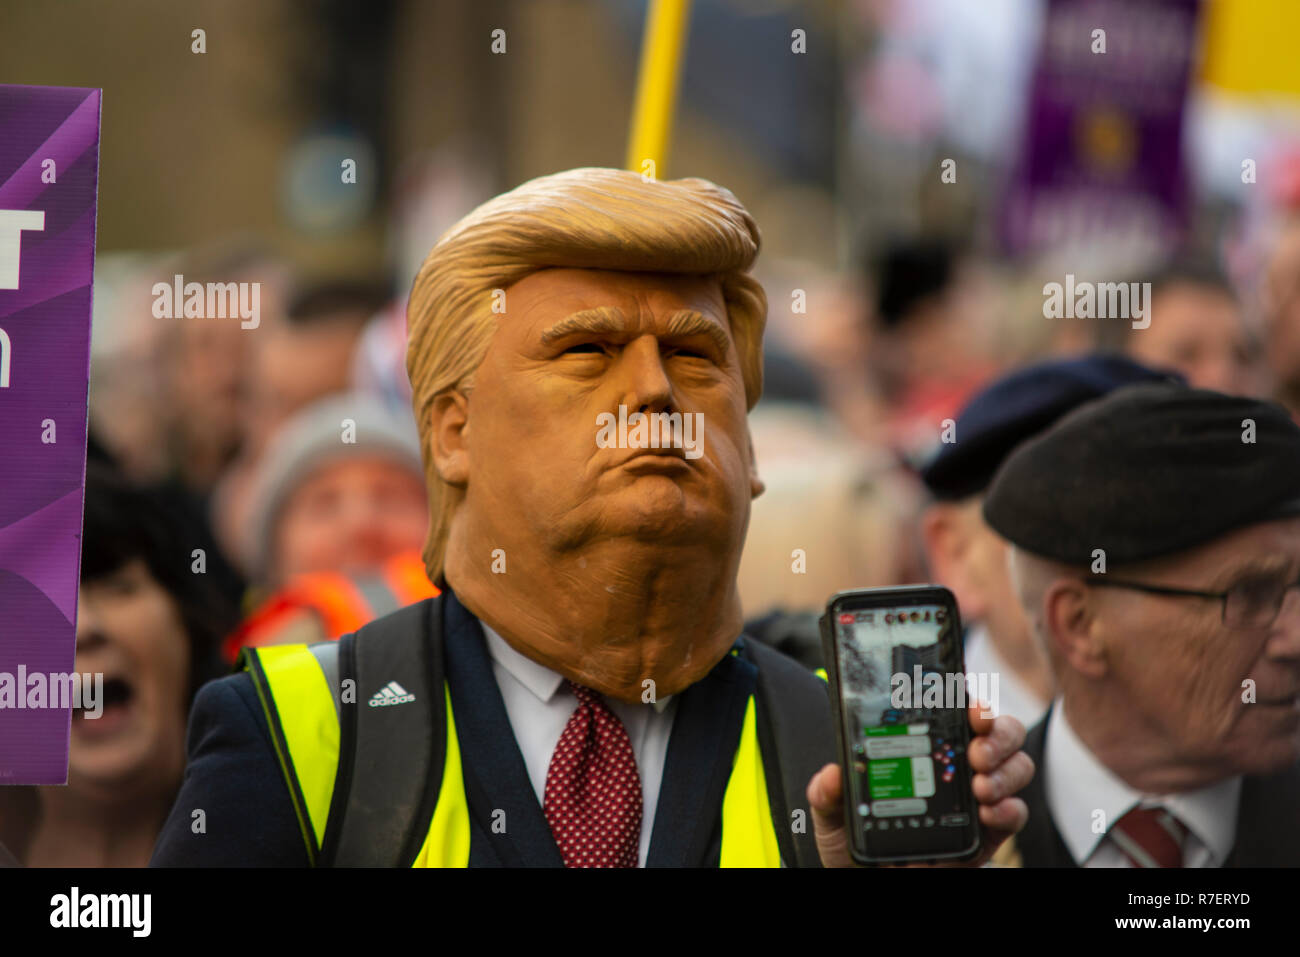 Brexit Betrayal march. Protesters are demonstrating at what they see as a betrayal by the UK government in not following through with leaving the EU in its entirety after the referendum. Donald Trump mask Stock Photo